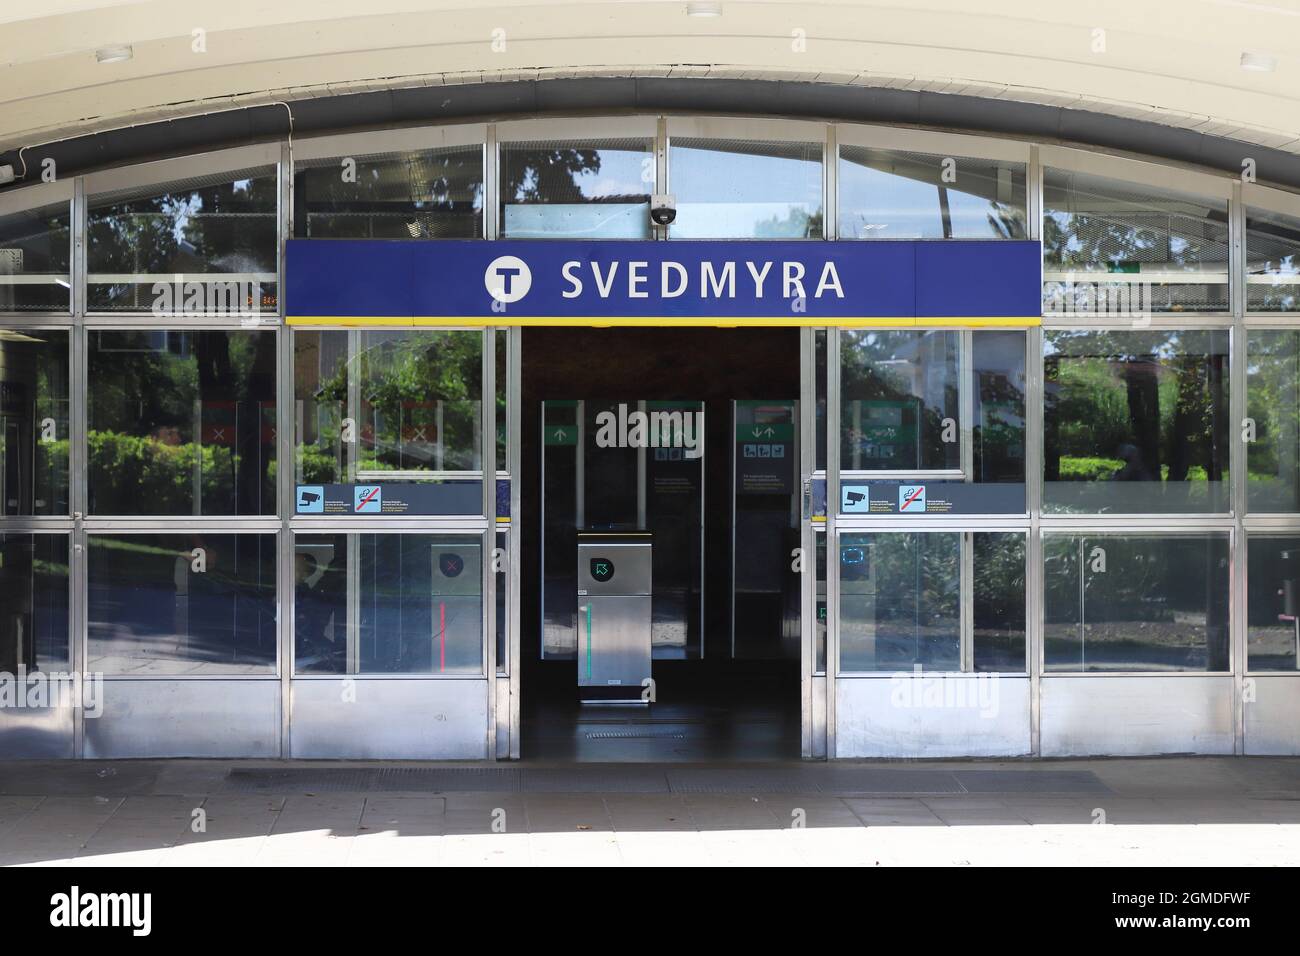 Stockholm, Sweden - August 31, 2021: Exterior view of the entrance to the suburban Svedmyra metro station. Stock Photo